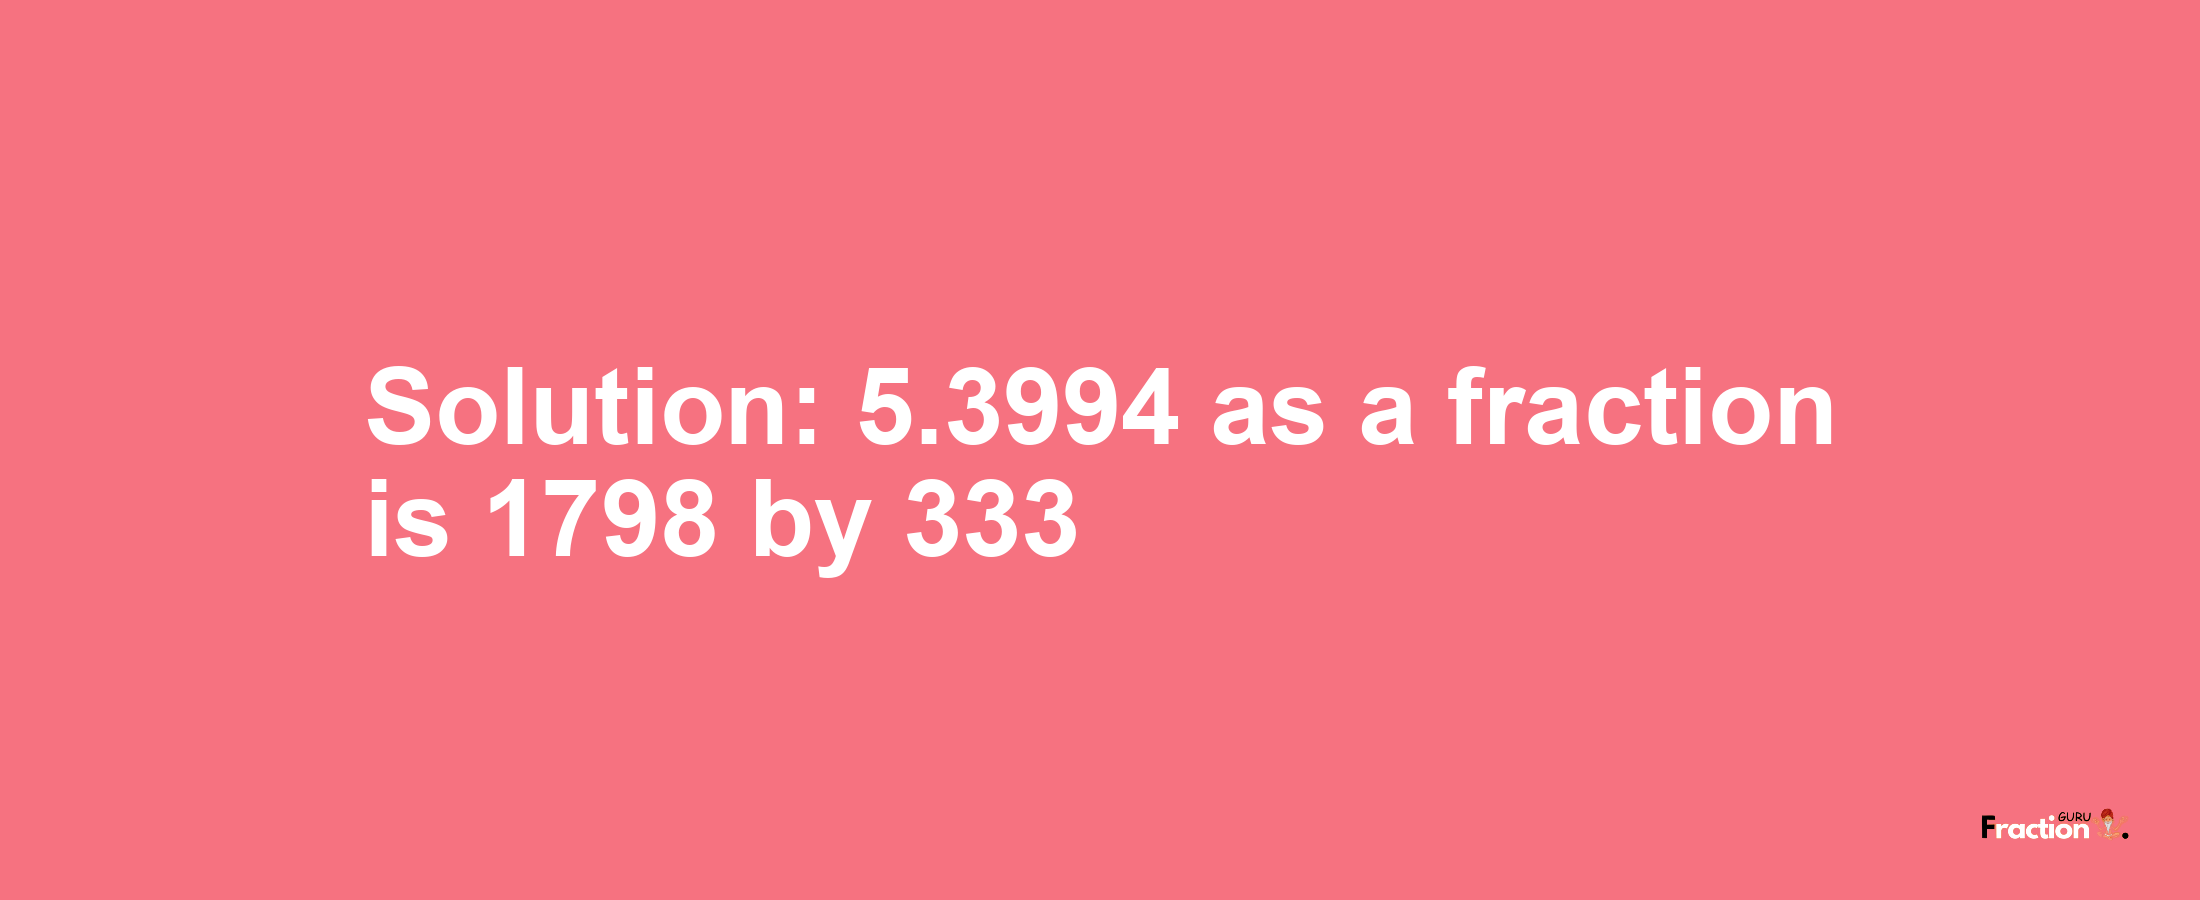 Solution:5.3994 as a fraction is 1798/333